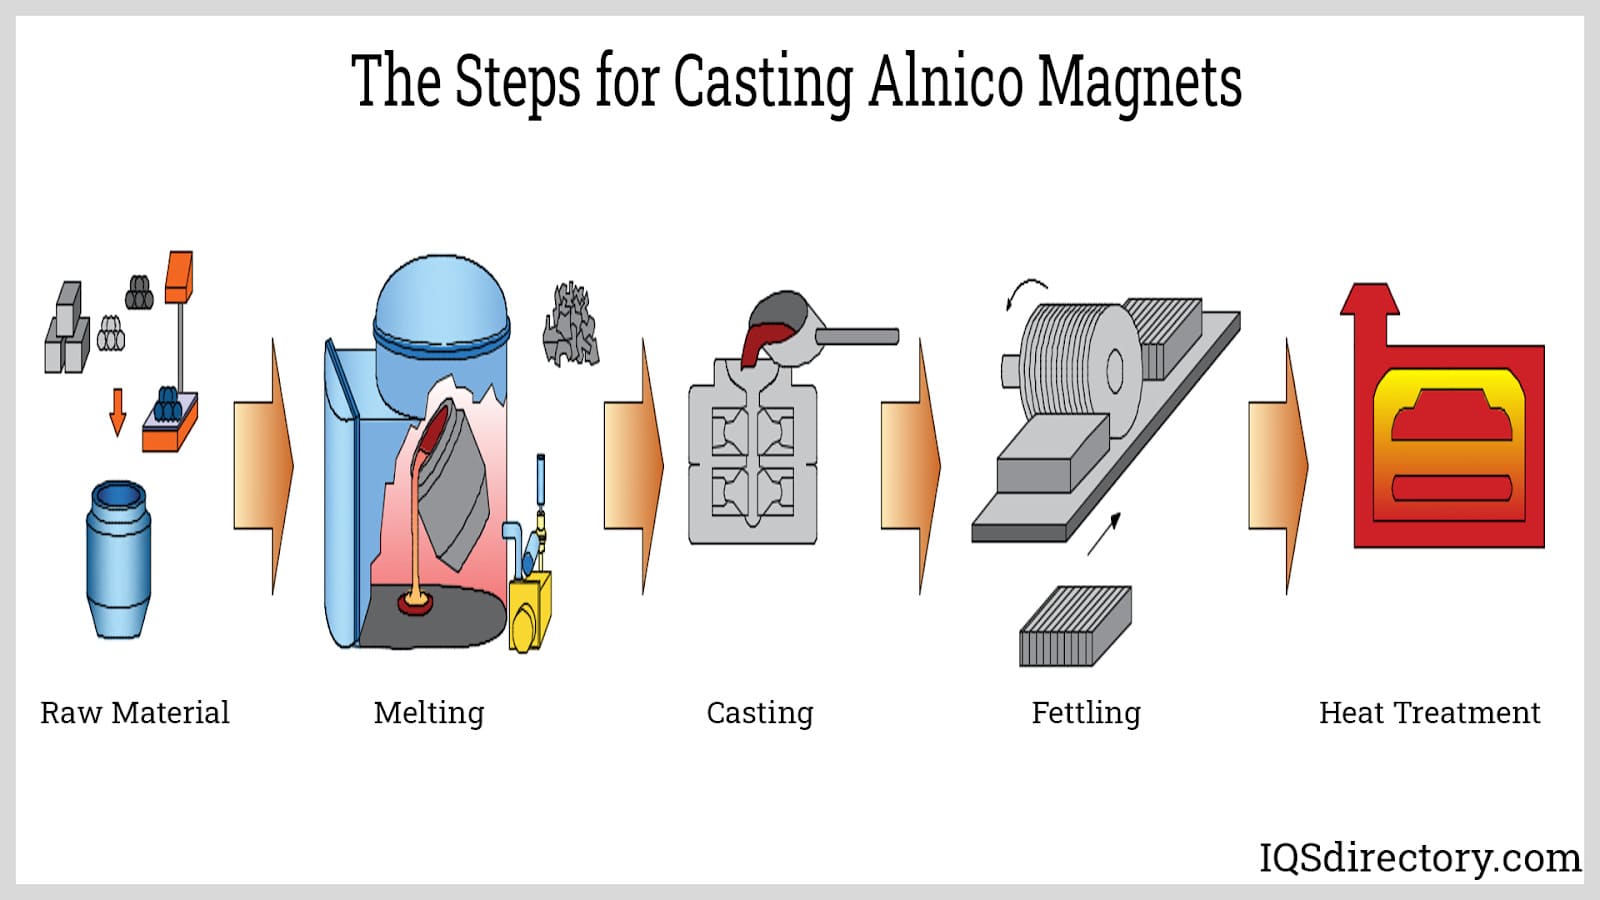 The Steps for Casting Alnico Magnets